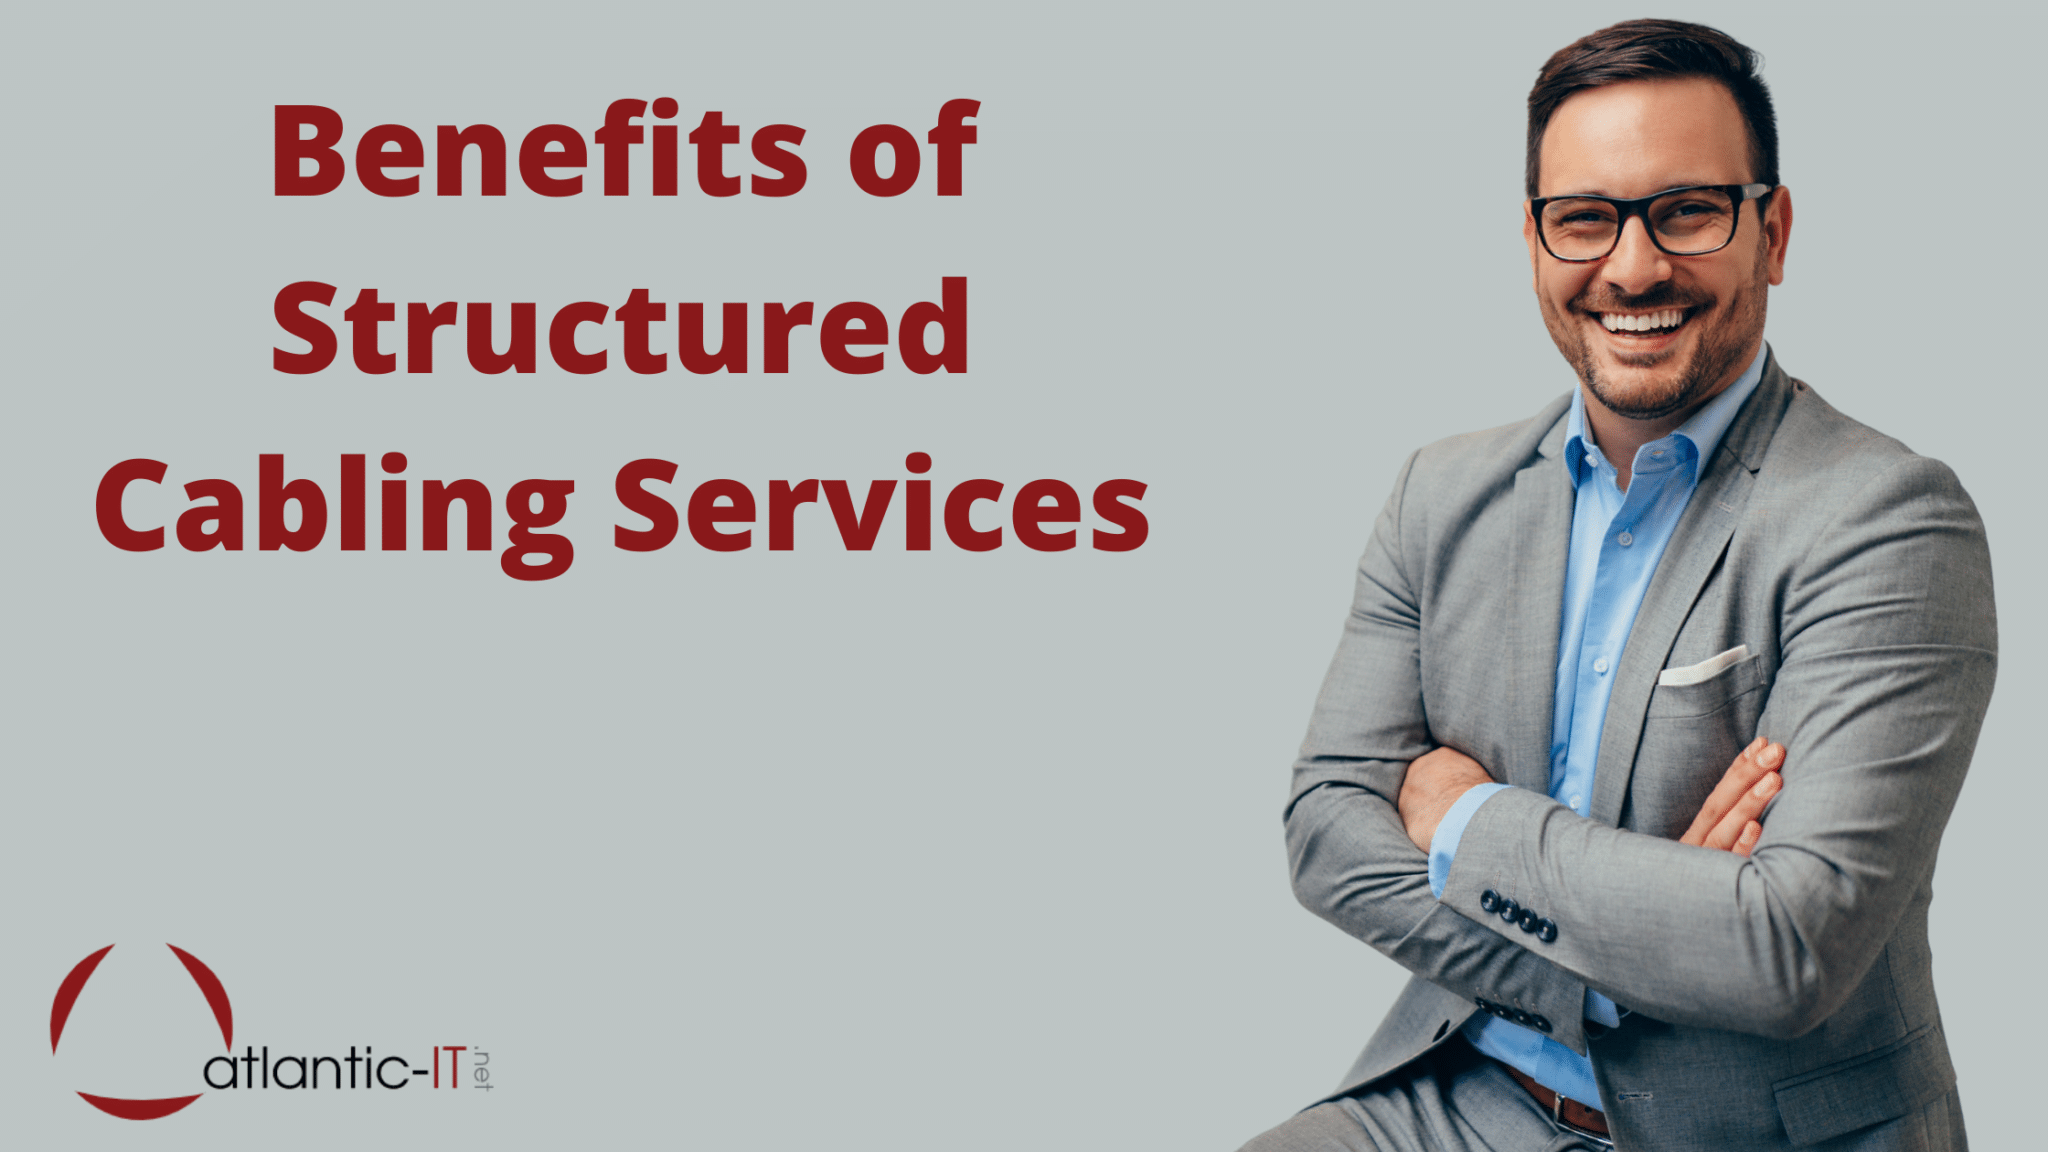 Benefits of Structured Cabling Services